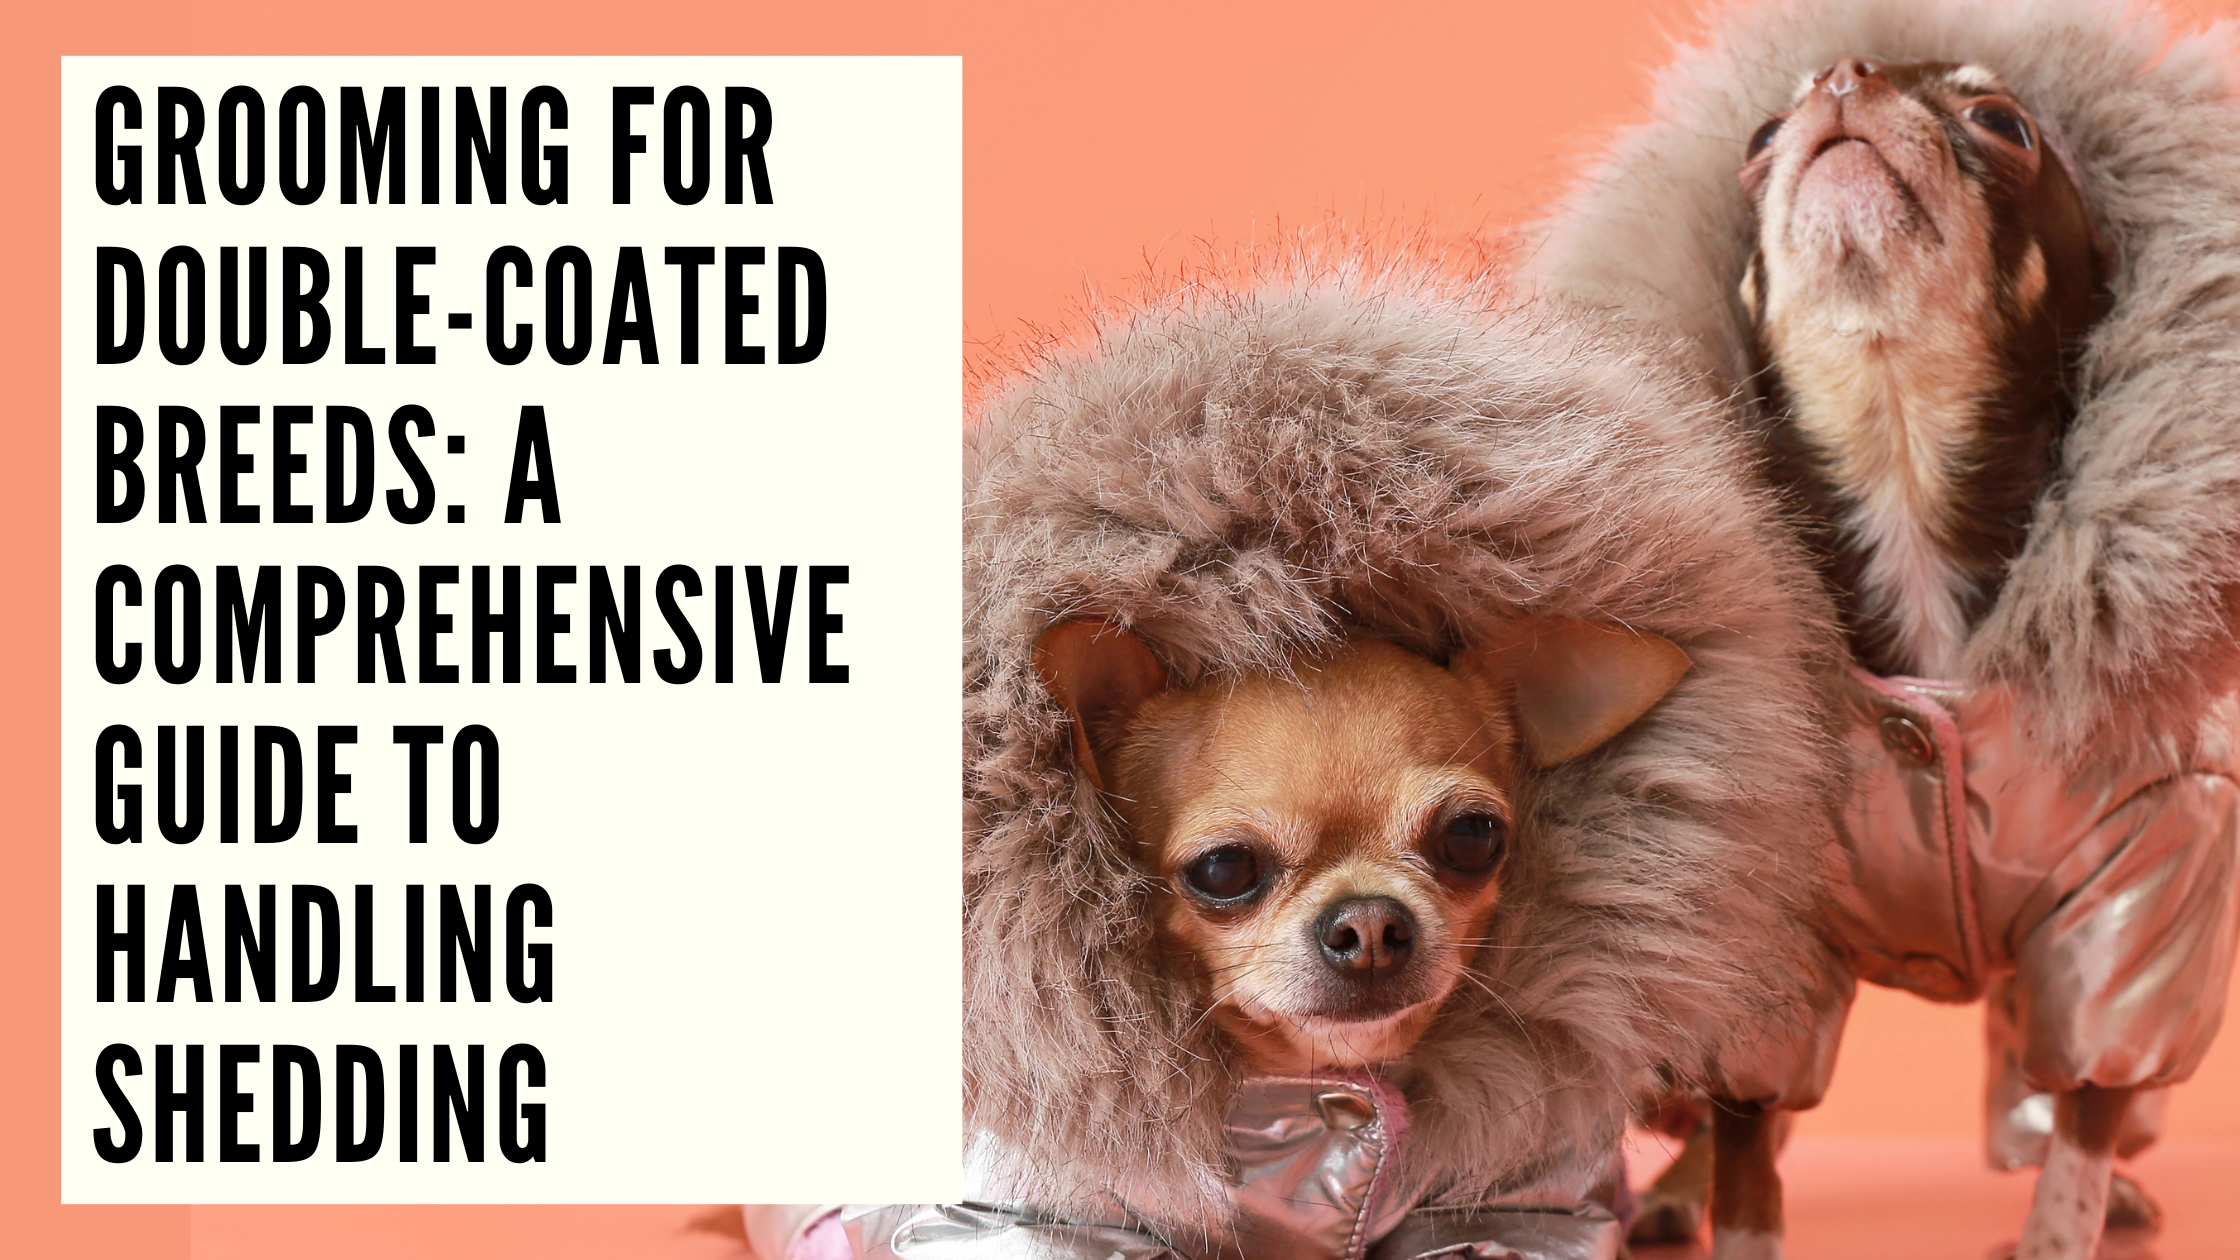 Grooming for Double-Coated Breeds A Comprehensive Guide to Handling Shedding